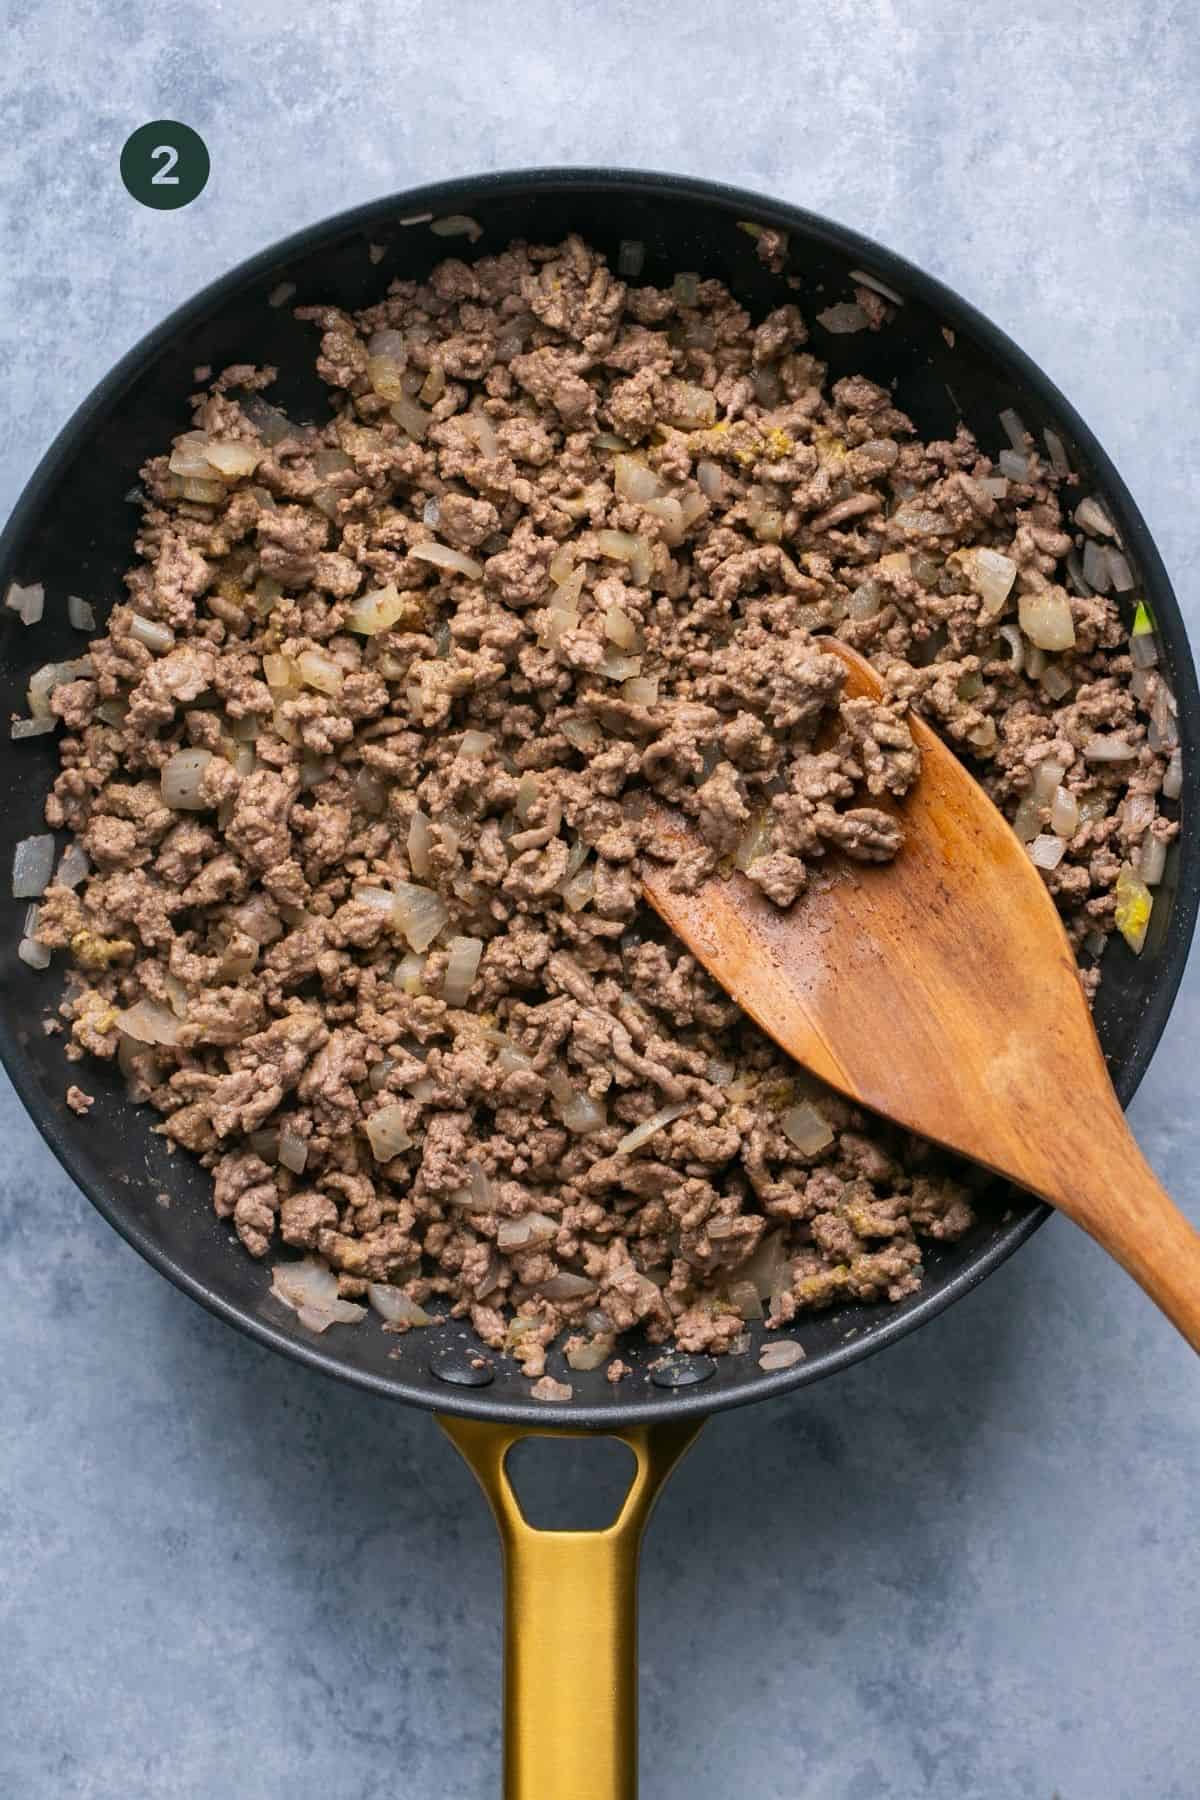 Fully cooked ground beef, onion, mustard and spices. 